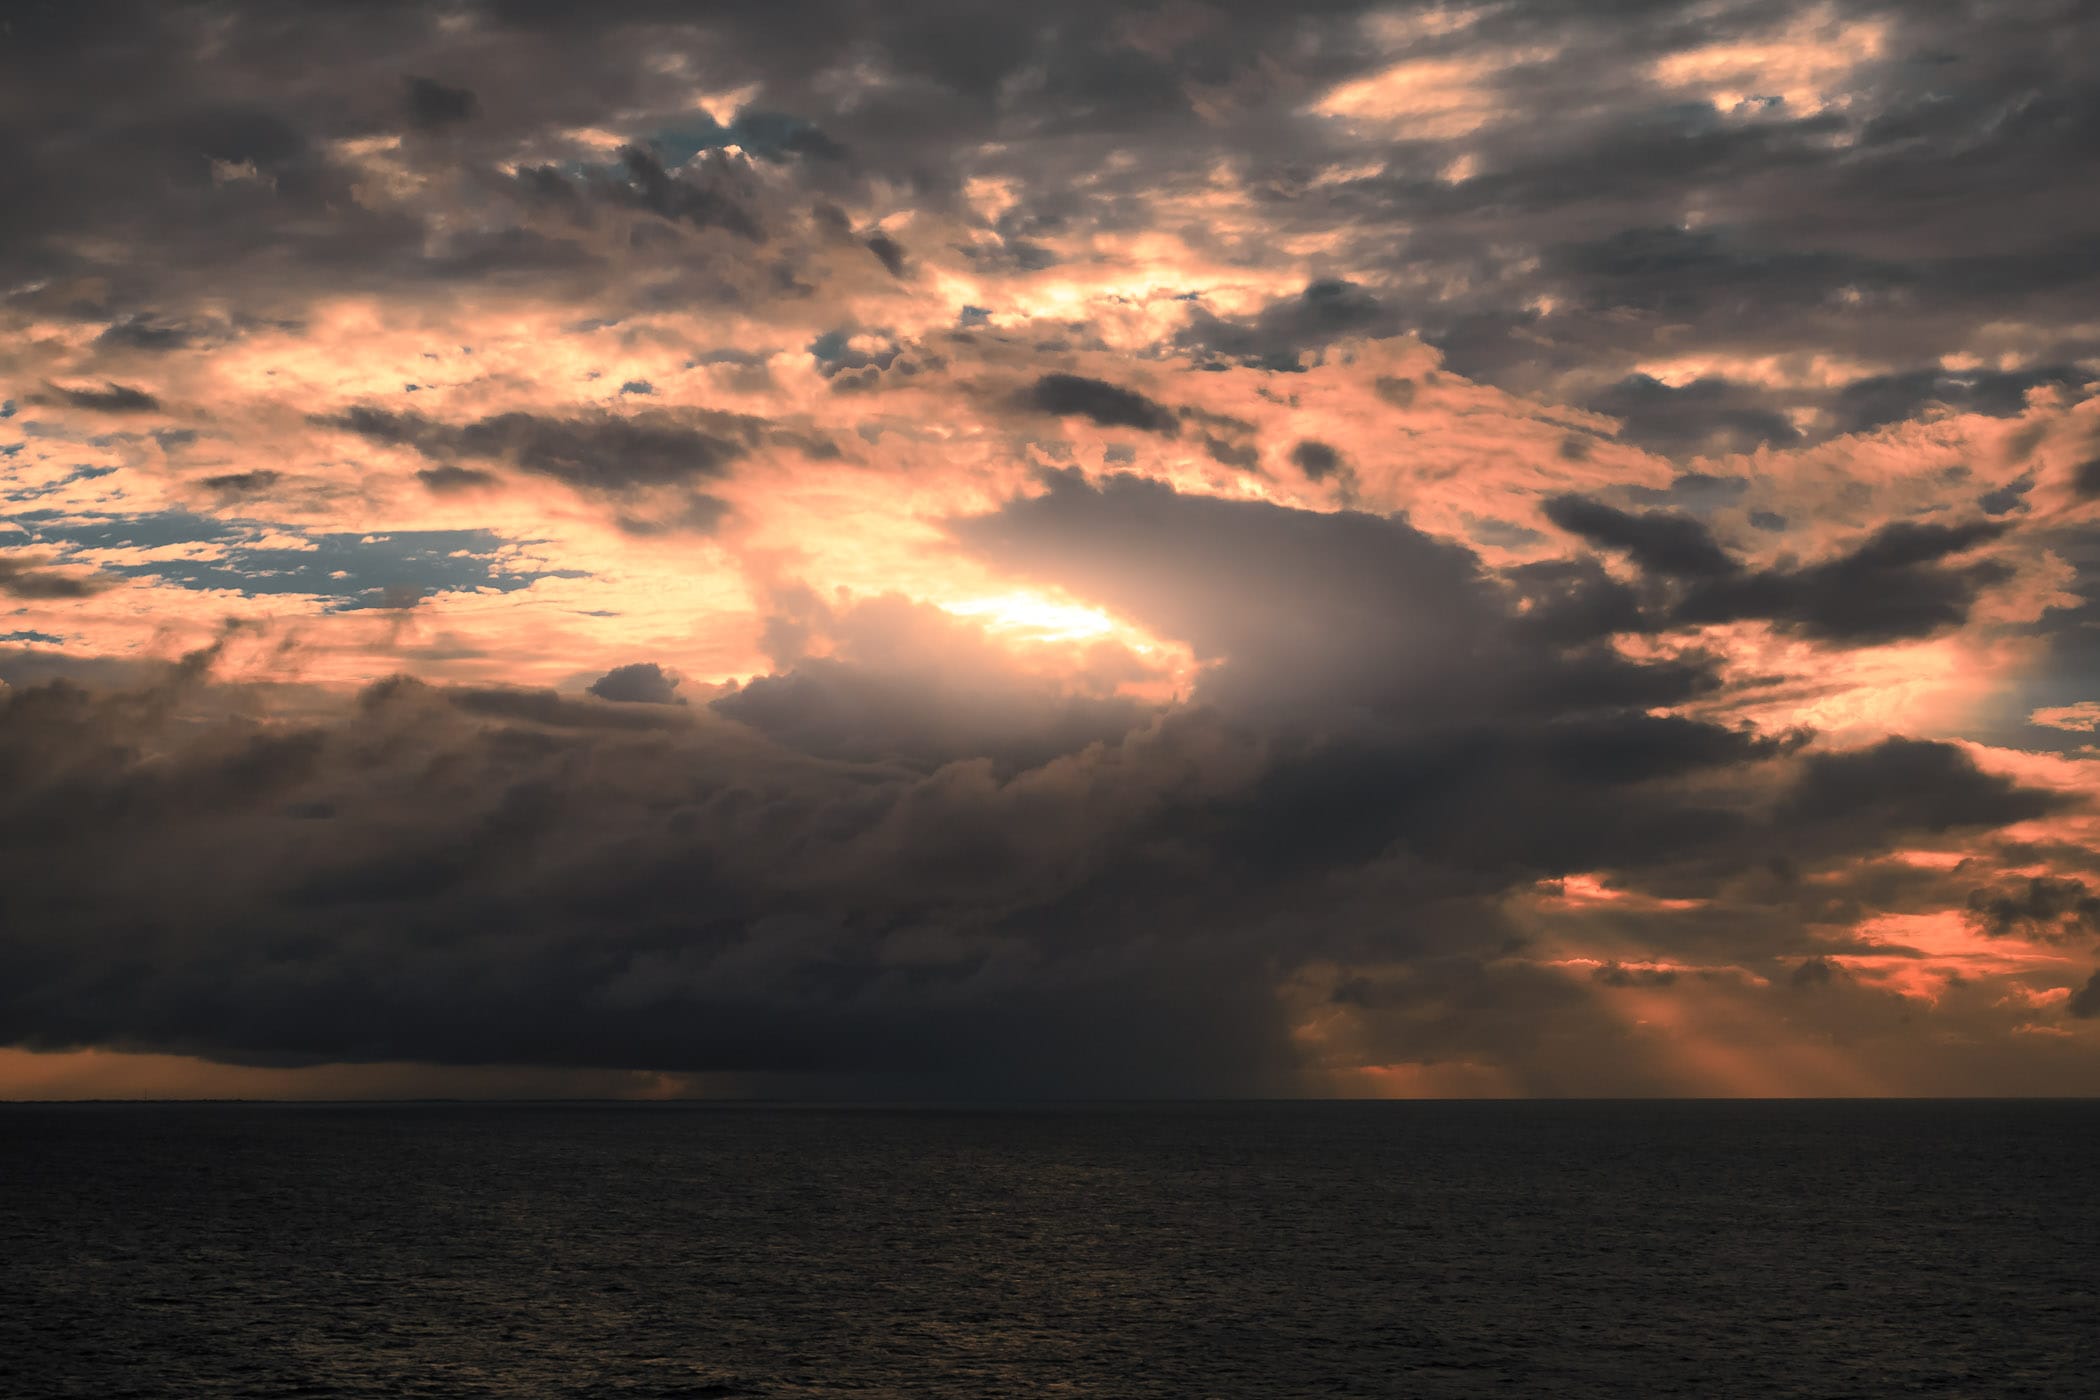 The rising sun silhouettes a rain cloud on the horizon somewhere off the coast of the Yucatan Peninsula in the Gulf of Mexico.